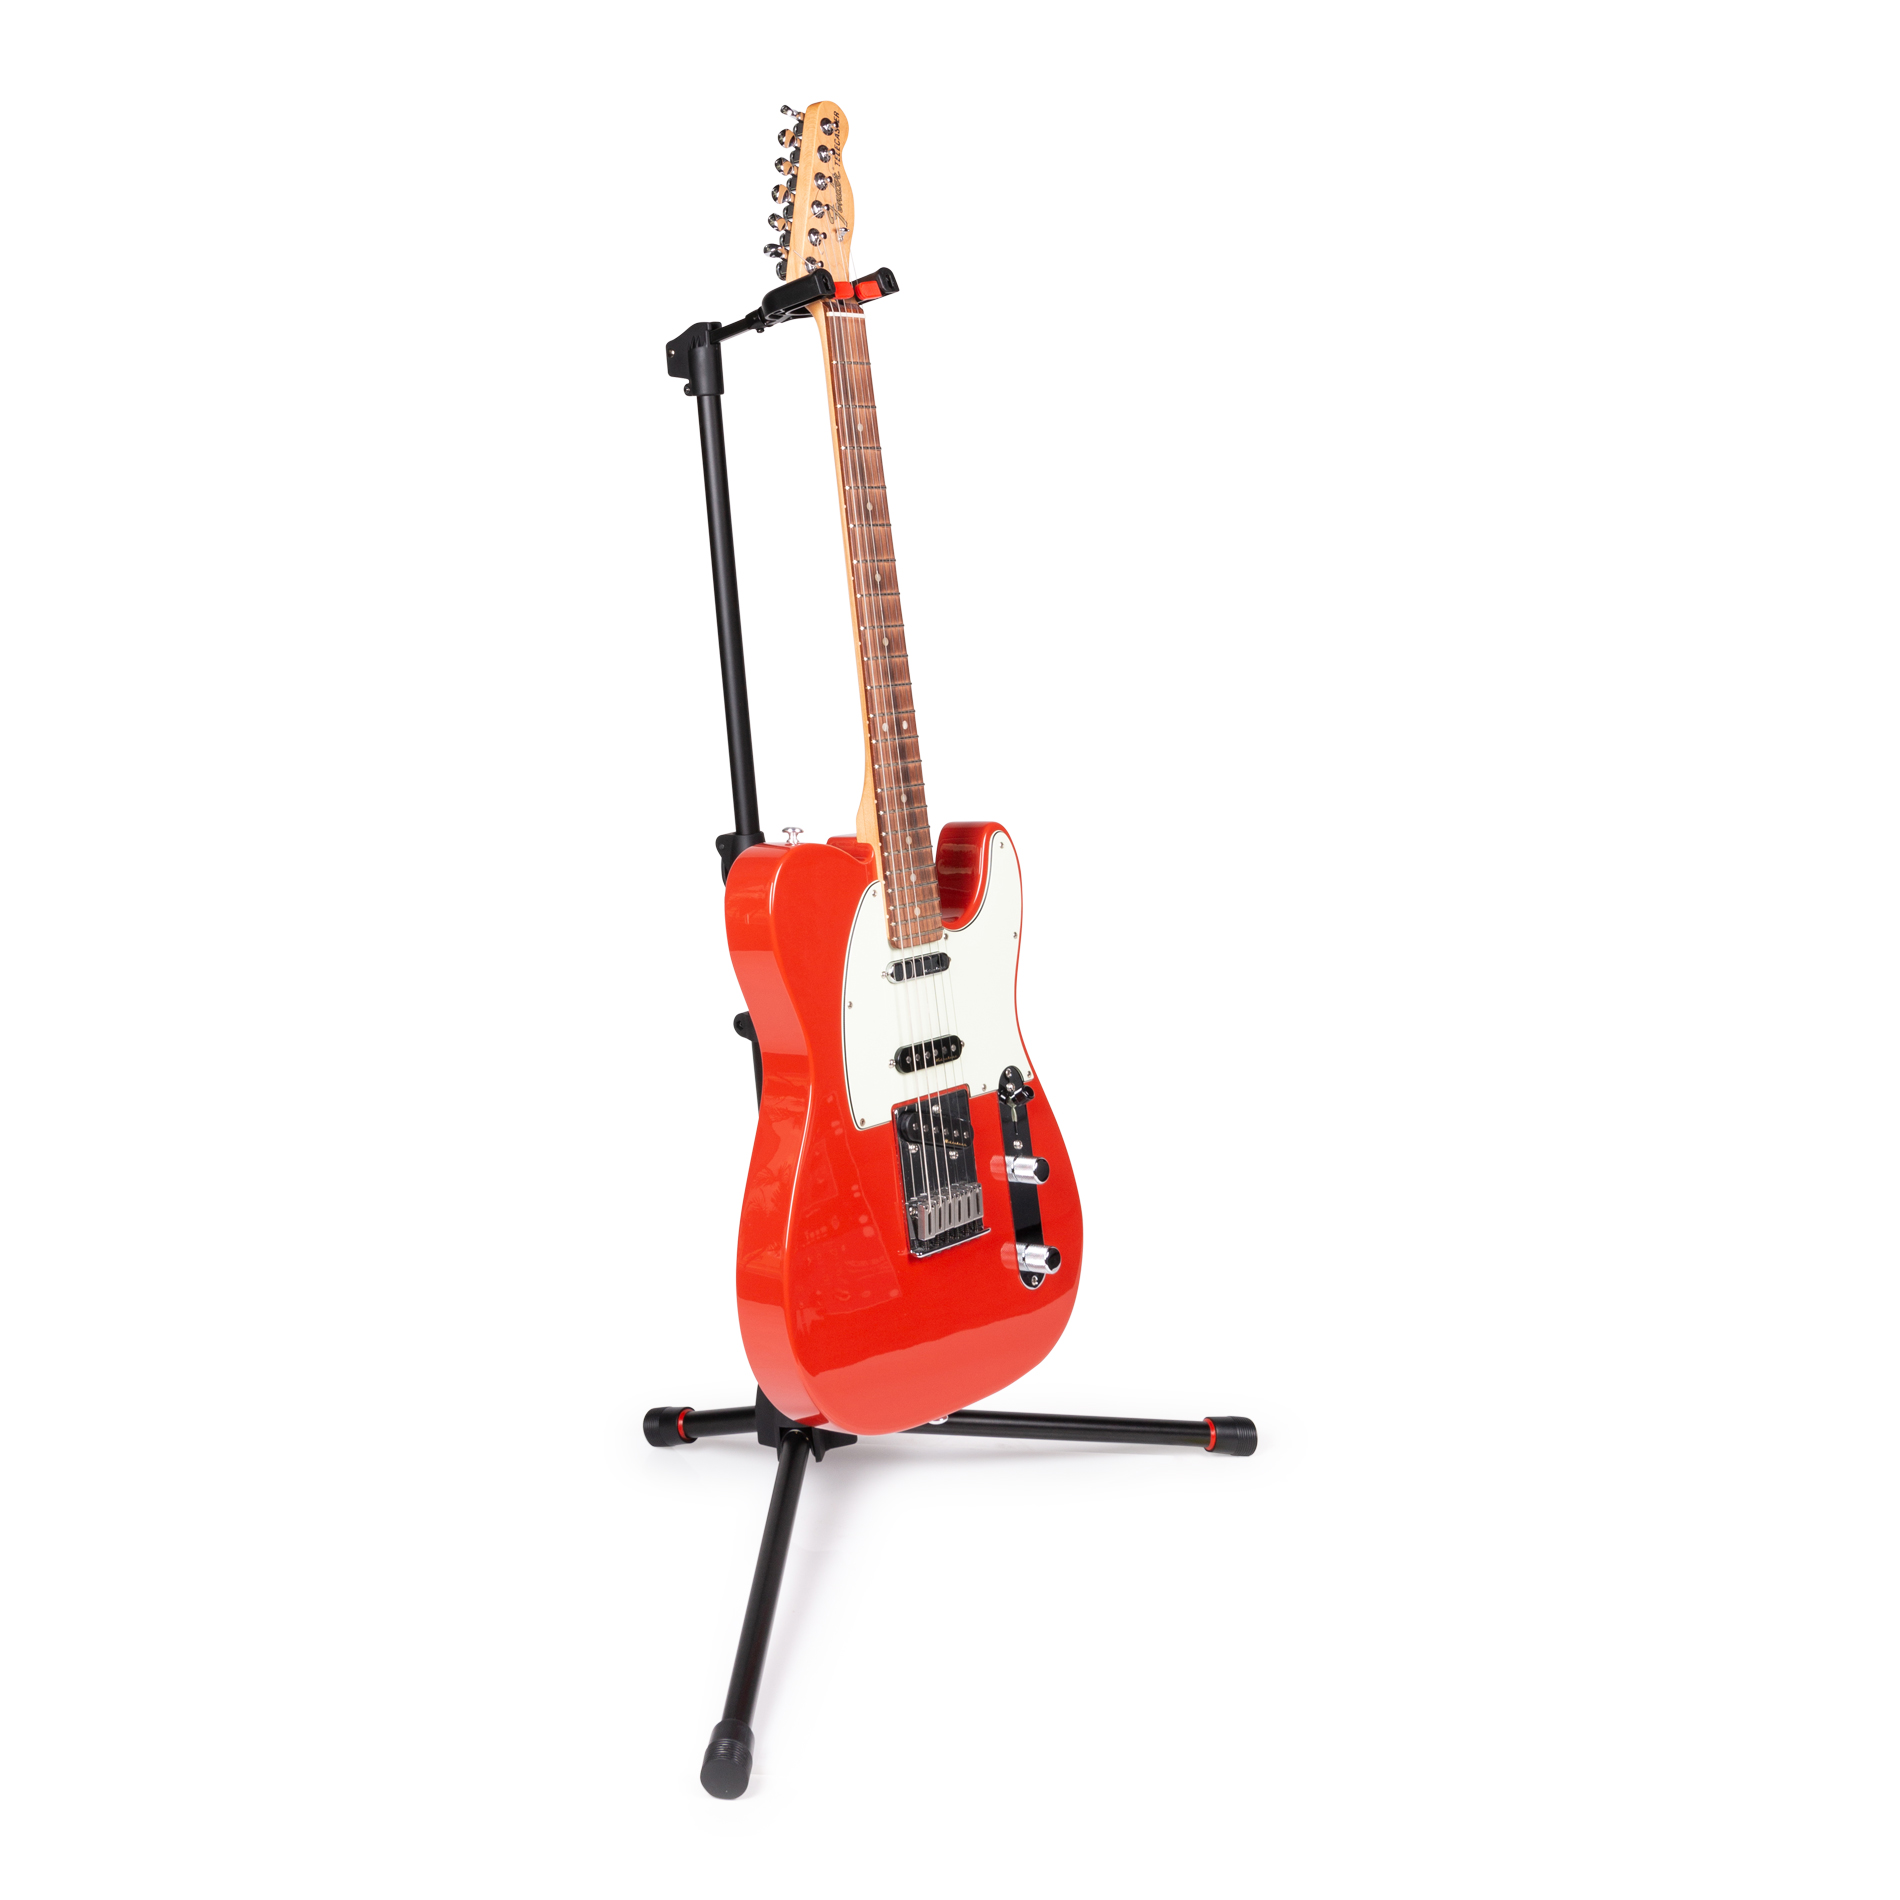 Hanging Guitar Stand with Locking Neck Cradle-GFW-GTR-1500